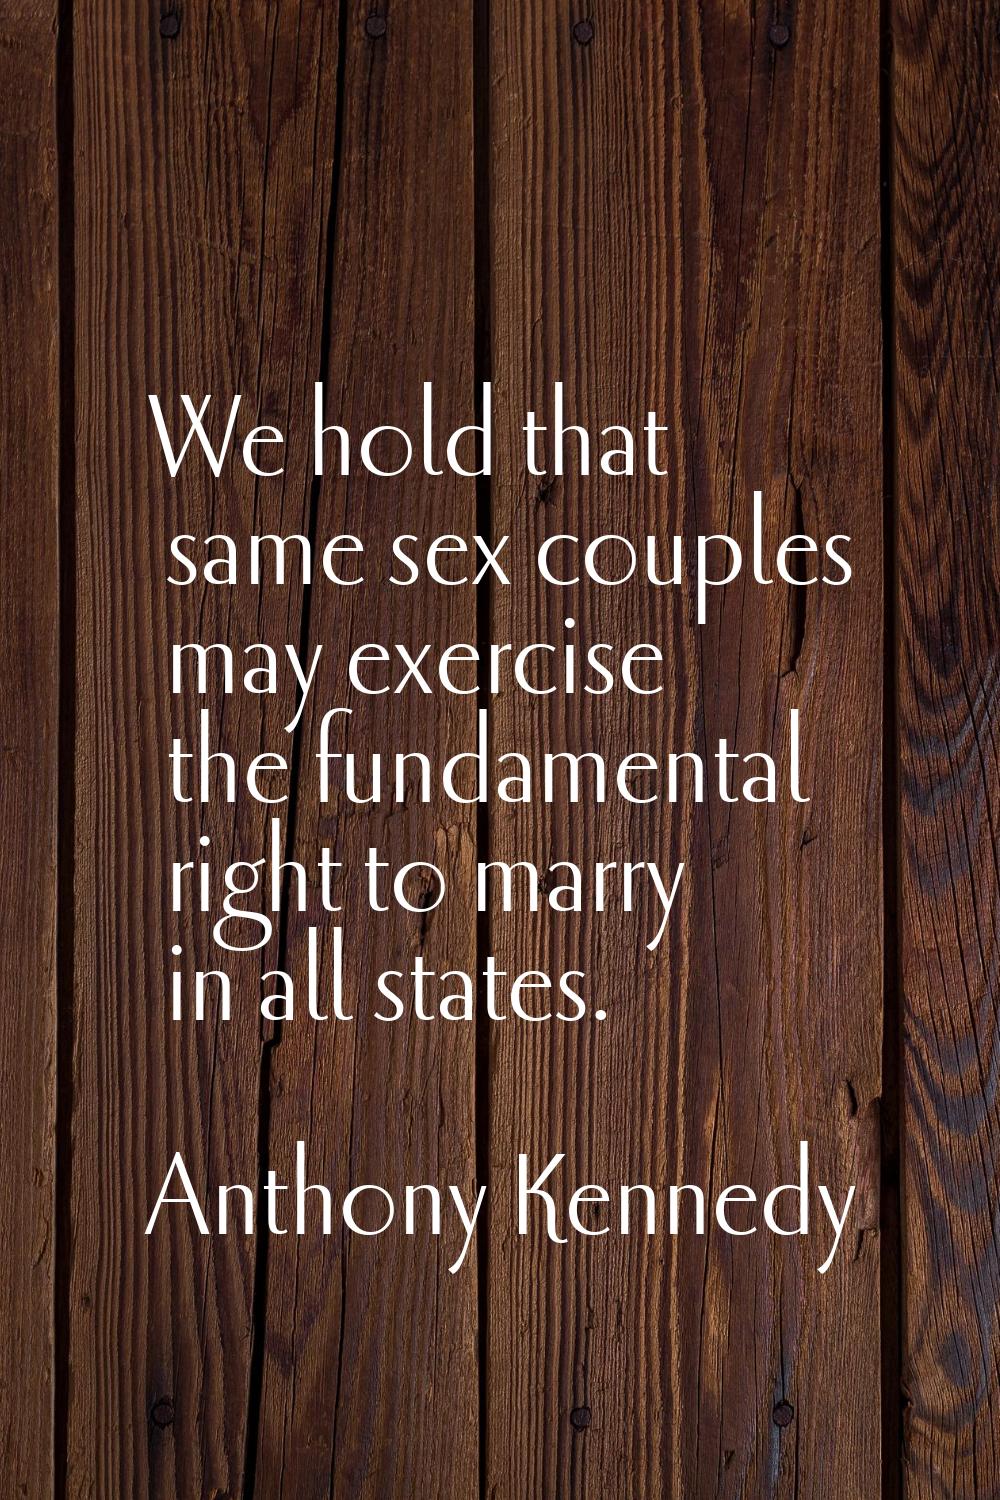 We hold that same sex couples may exercise the fundamental right to marry in all states.